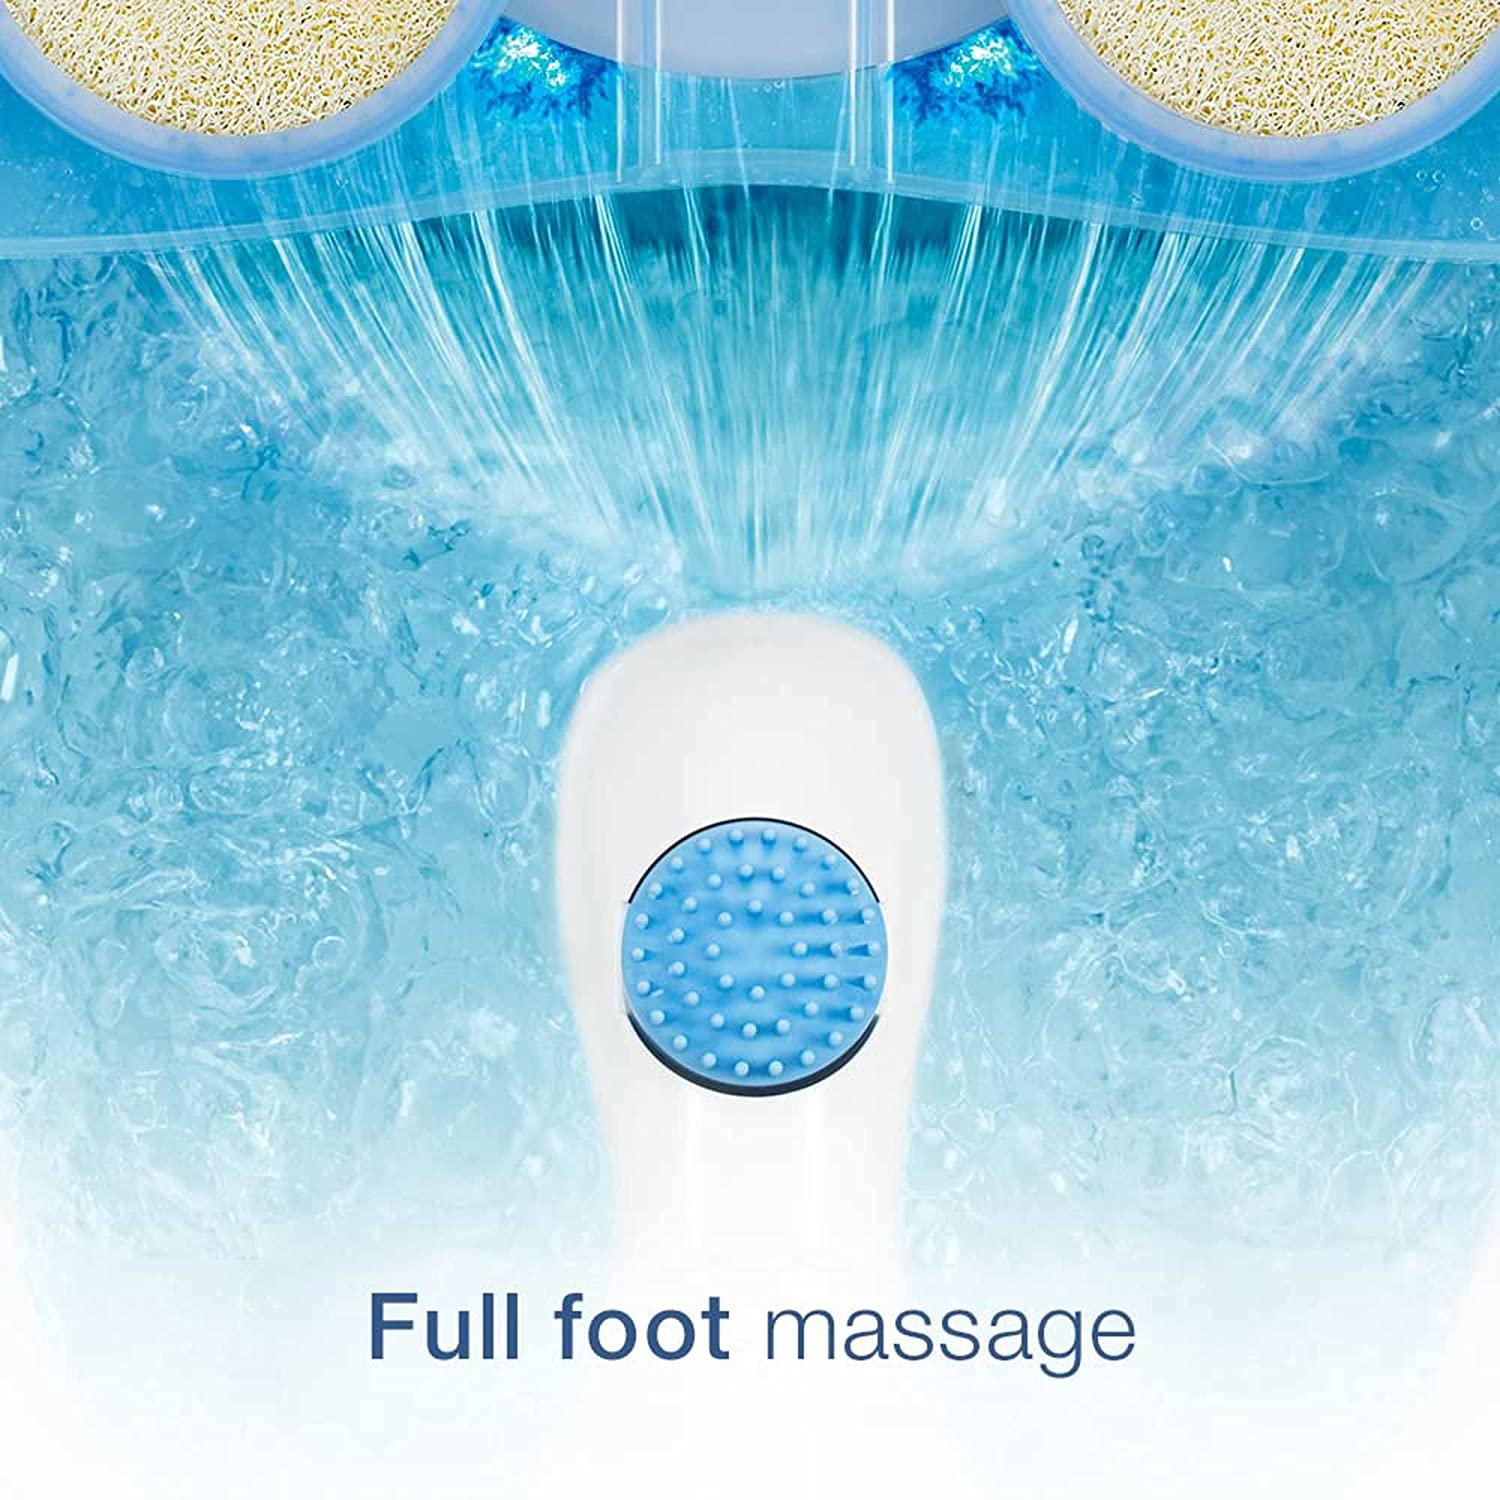 Conair Waterfall Pedicure Foot Spa Bath With Blue Led Lights Massaging Bubbles And Massage